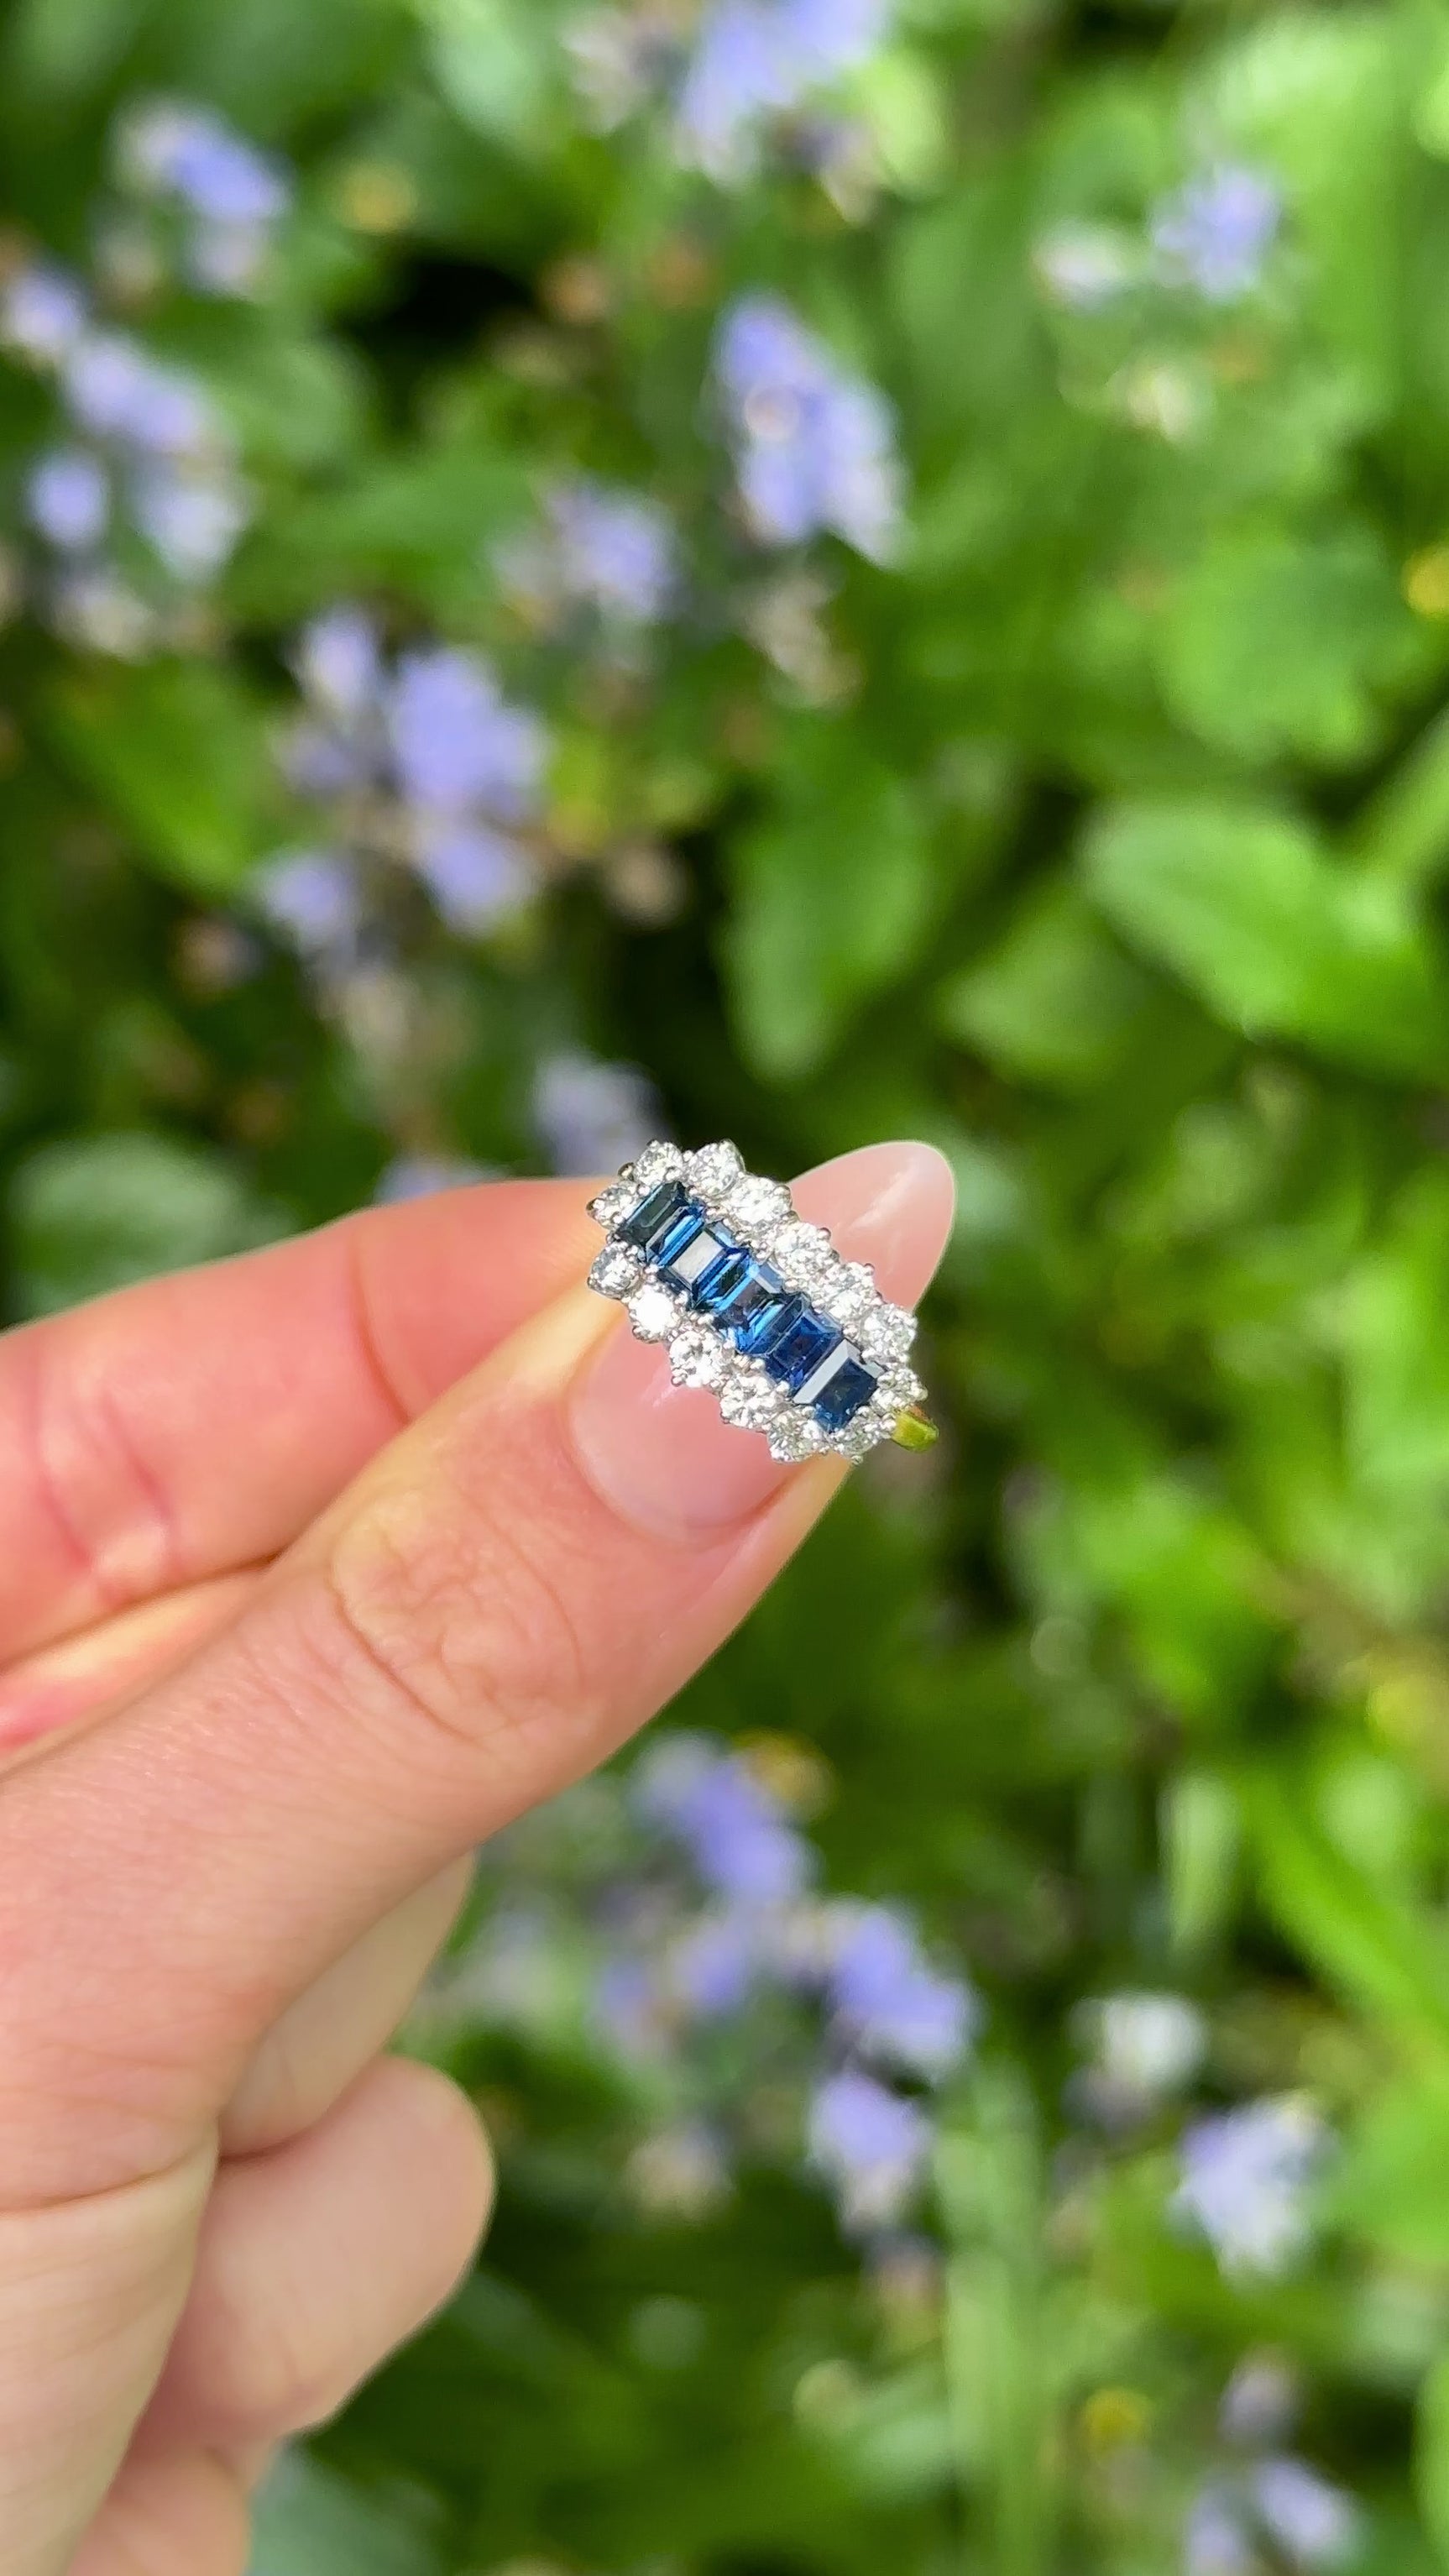  Vintage, 1950s Sapphire and Diamond Cocktail Ring, 18ct Yellow Gold and Platinum held in fingers.